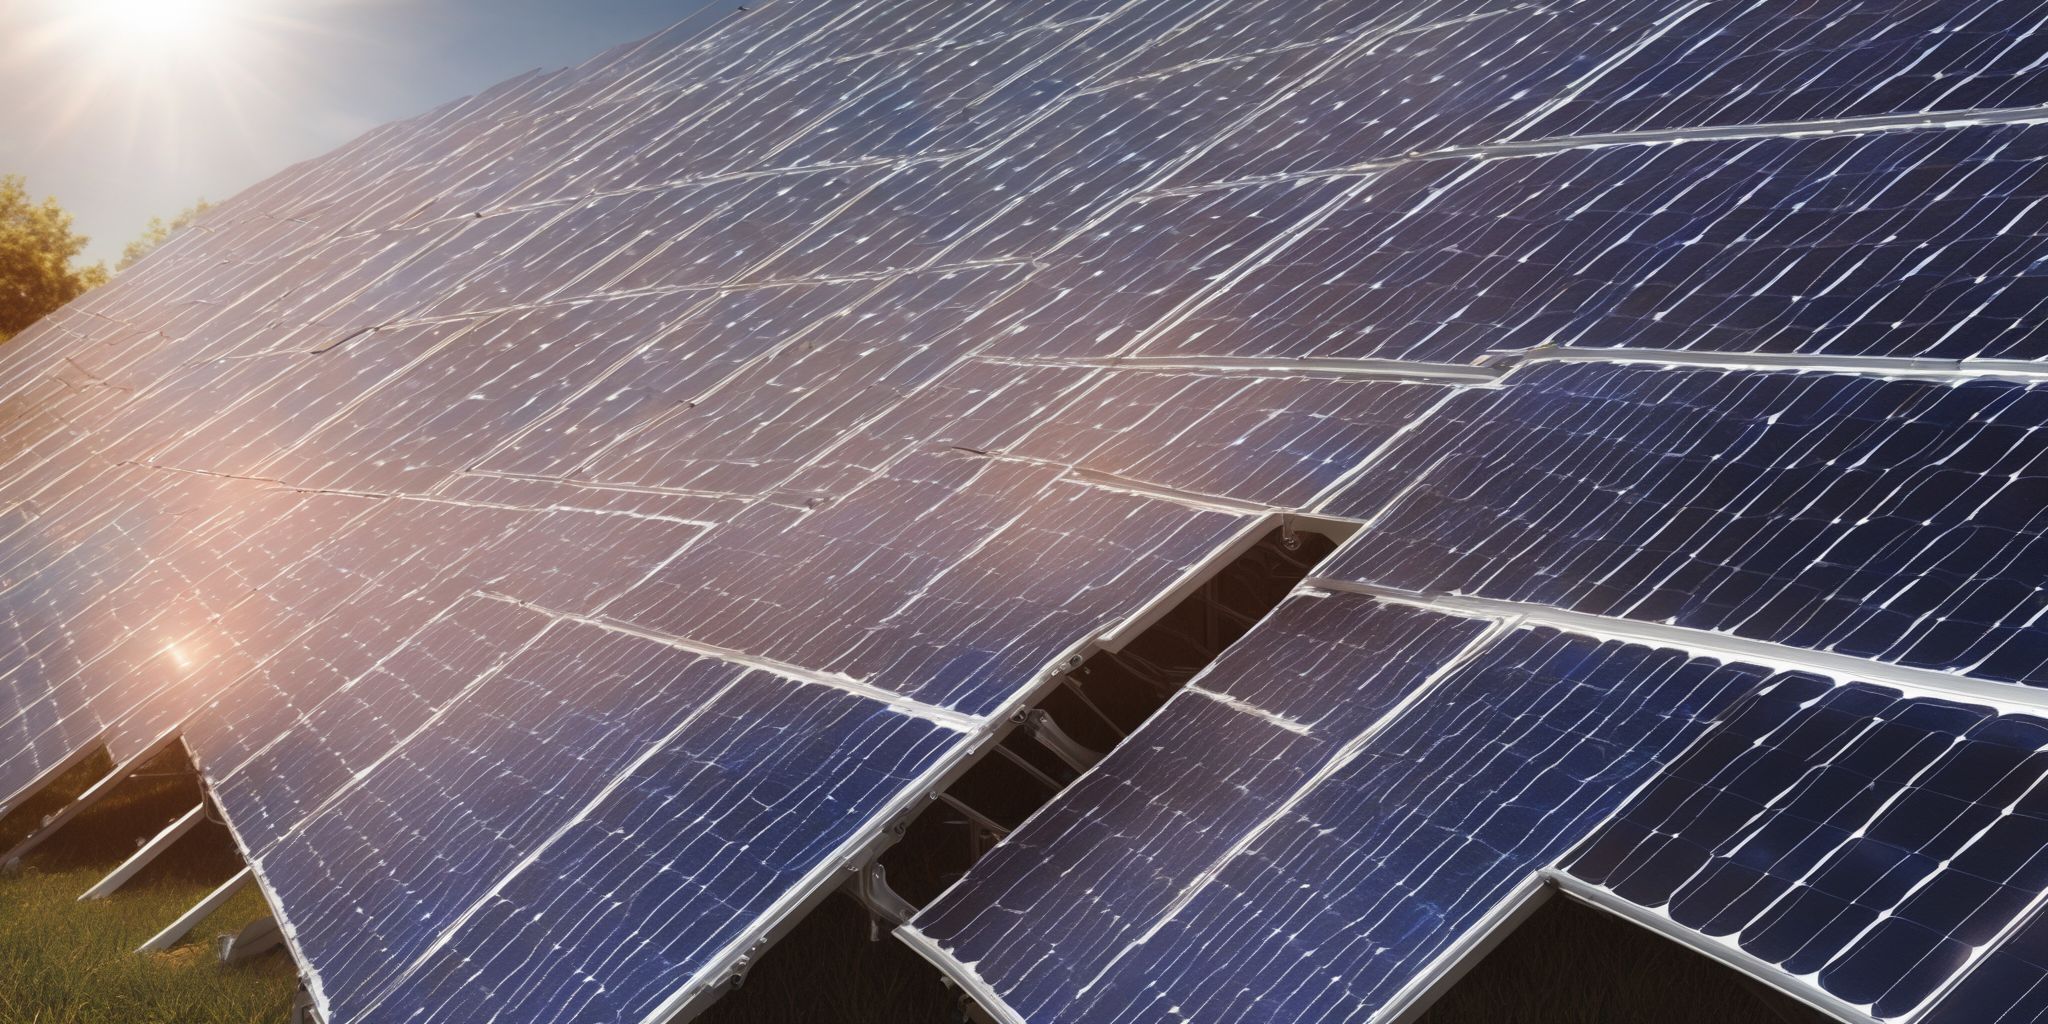 Solar panel  in realistic, photographic style